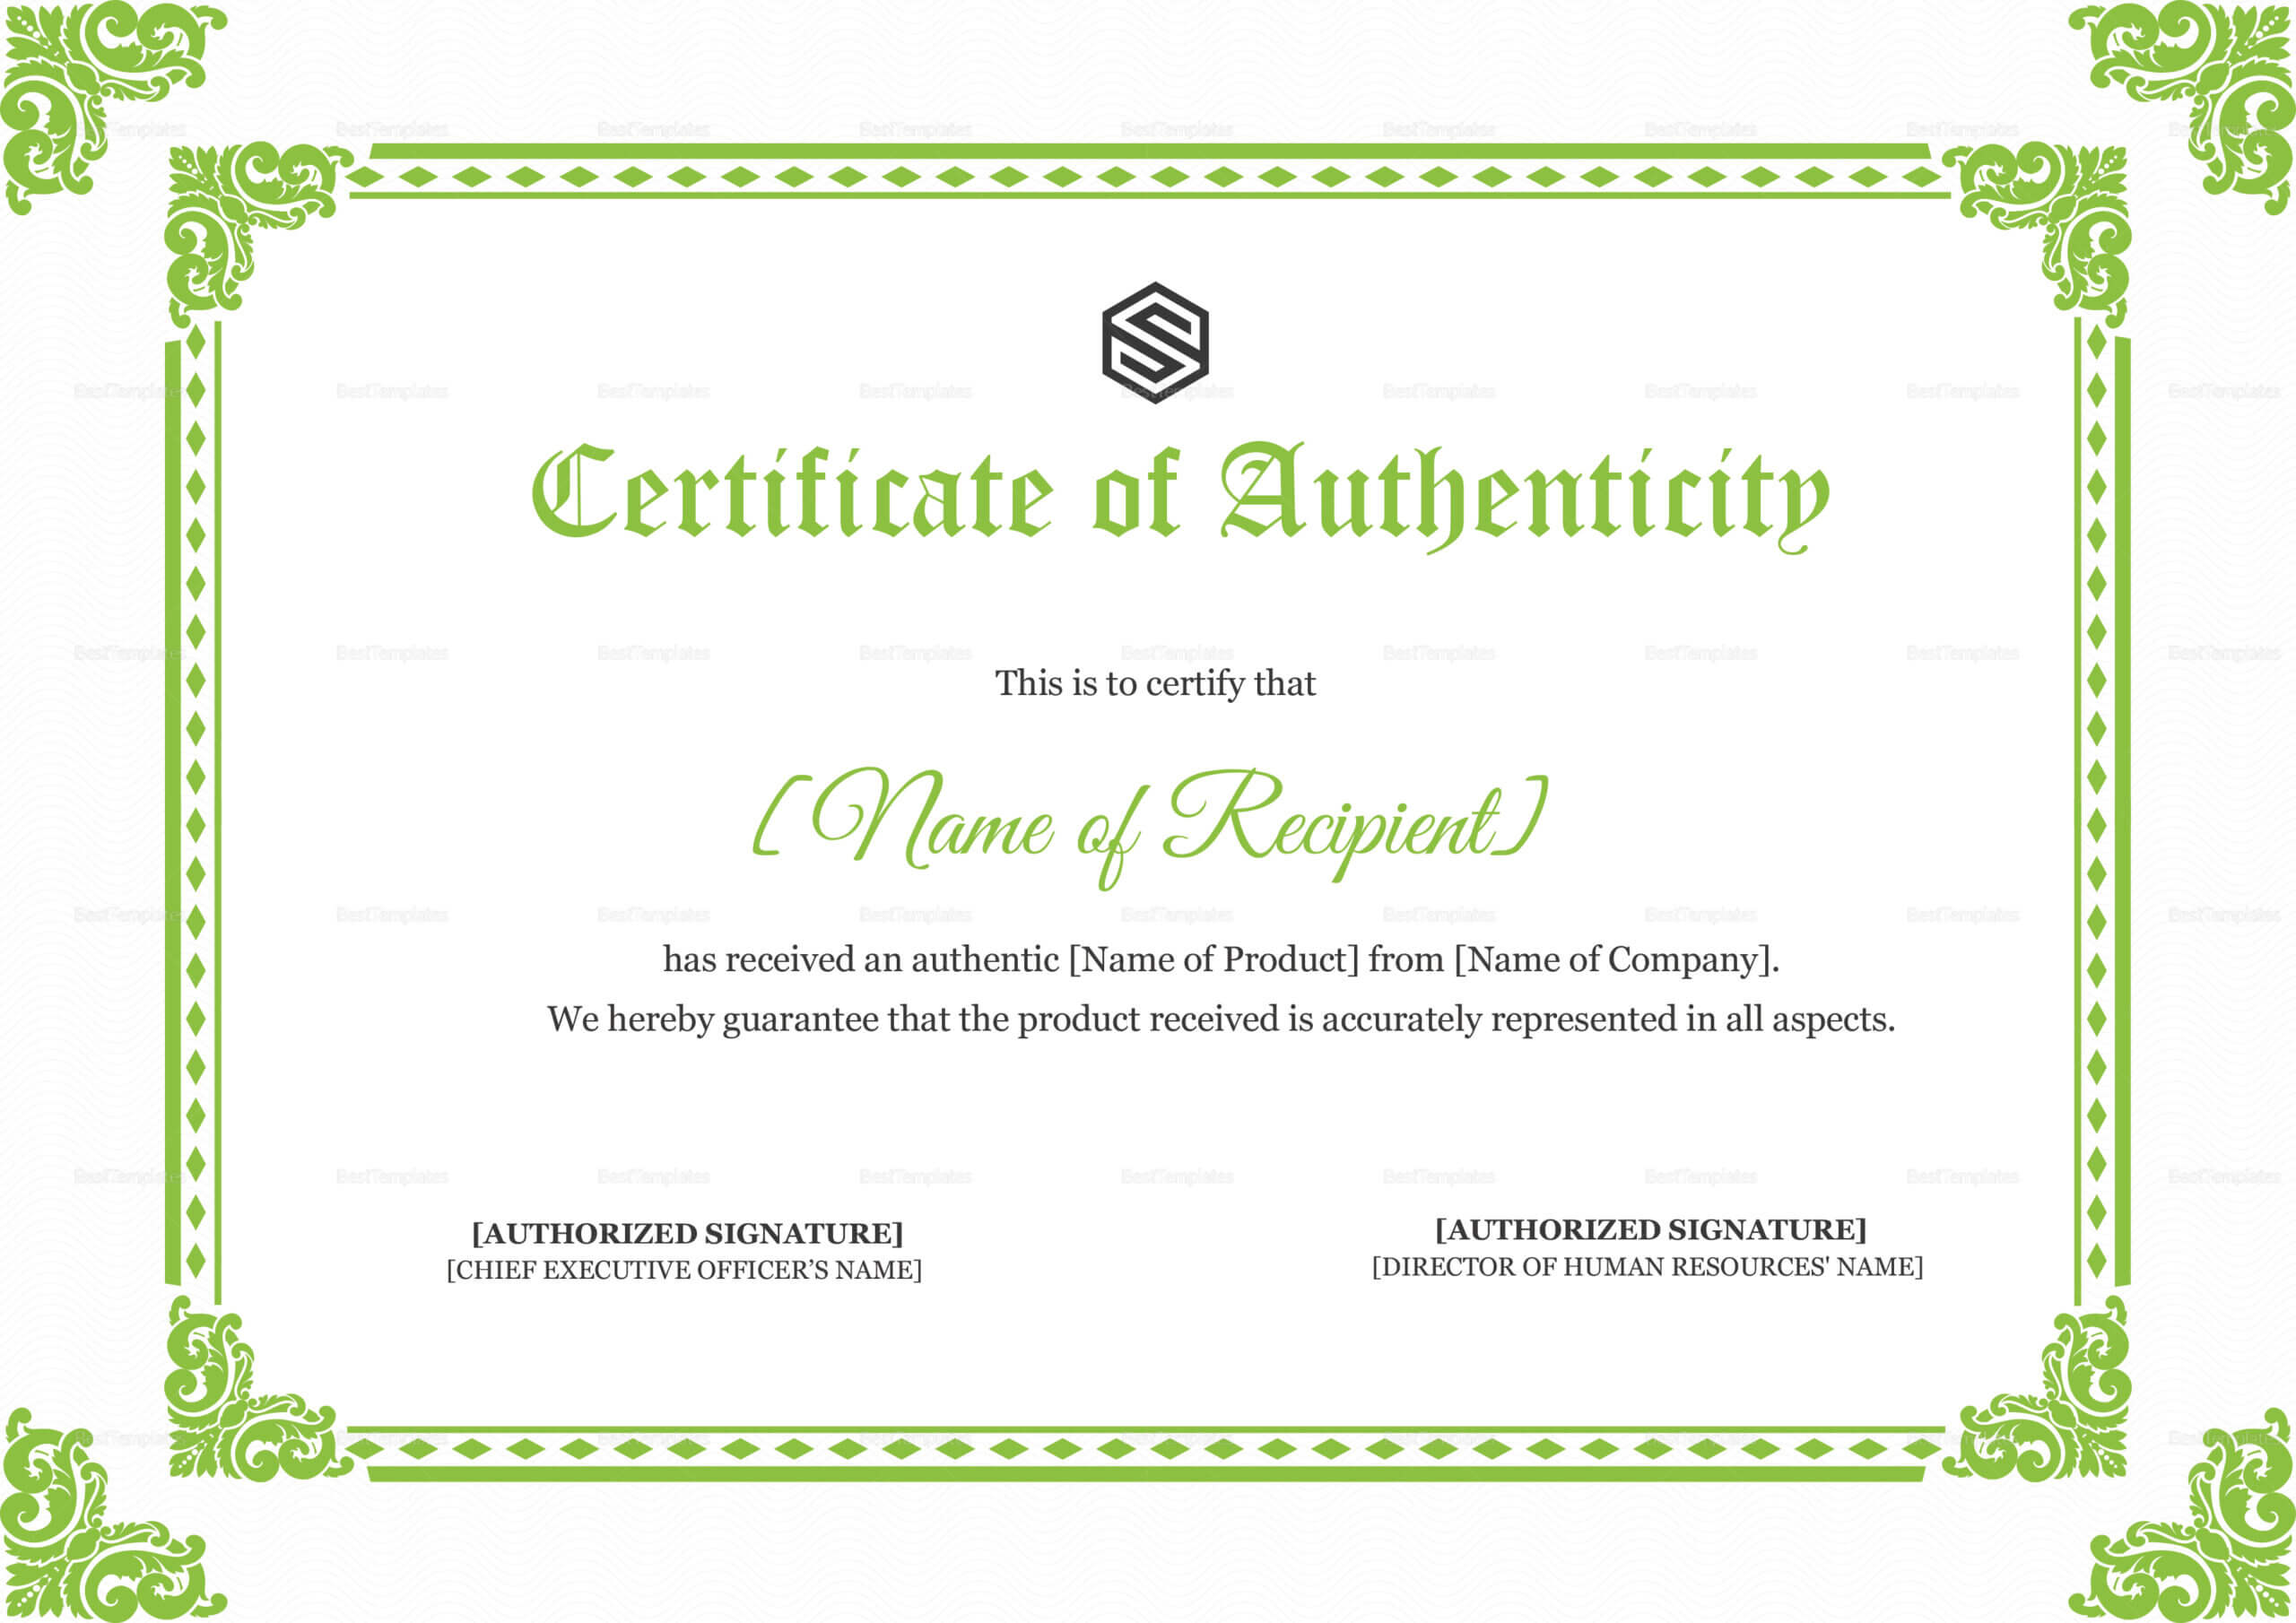 Certificate Of Authenticity Template With Certificate Of Authenticity Template